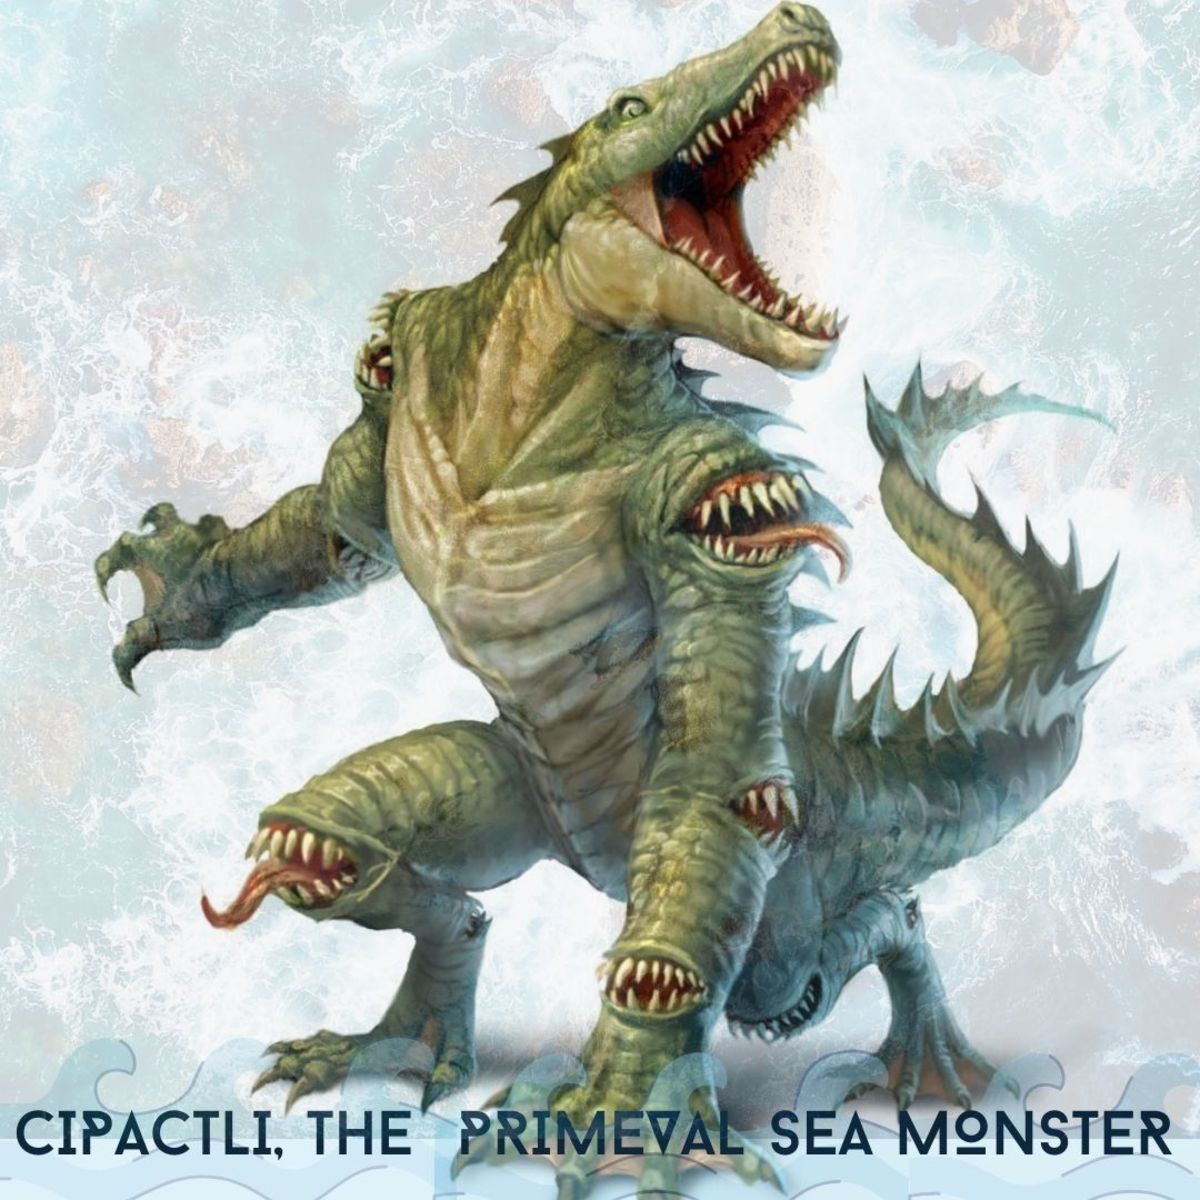 In Aztec cosmology, Cipactli was a celestial sea monster from which the world and the universe were created – one of the many versions of the Aztec creation story.